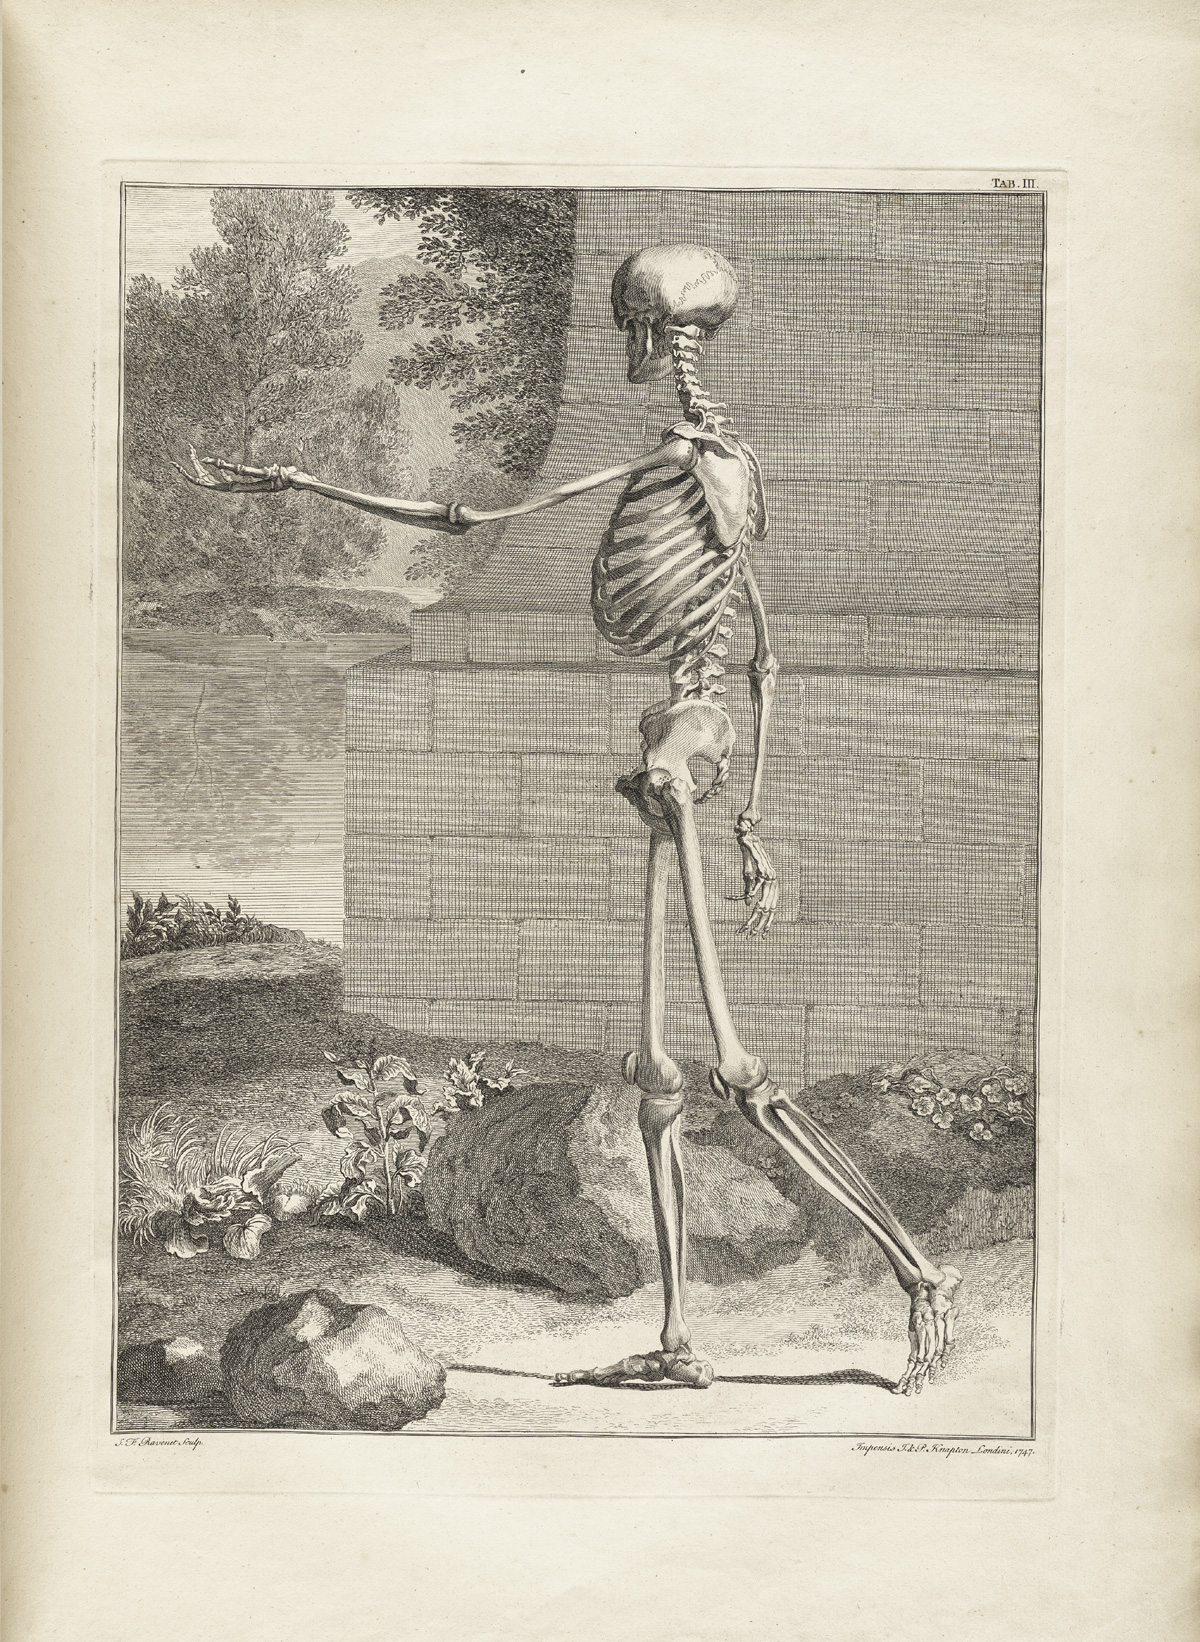 Table 3 of Bernhard Siegfried Albinus' Tabulae sceleti et musculorum corporis humani, featuring a full length left size view of a skeleton in a landscape with its left arm is extended.